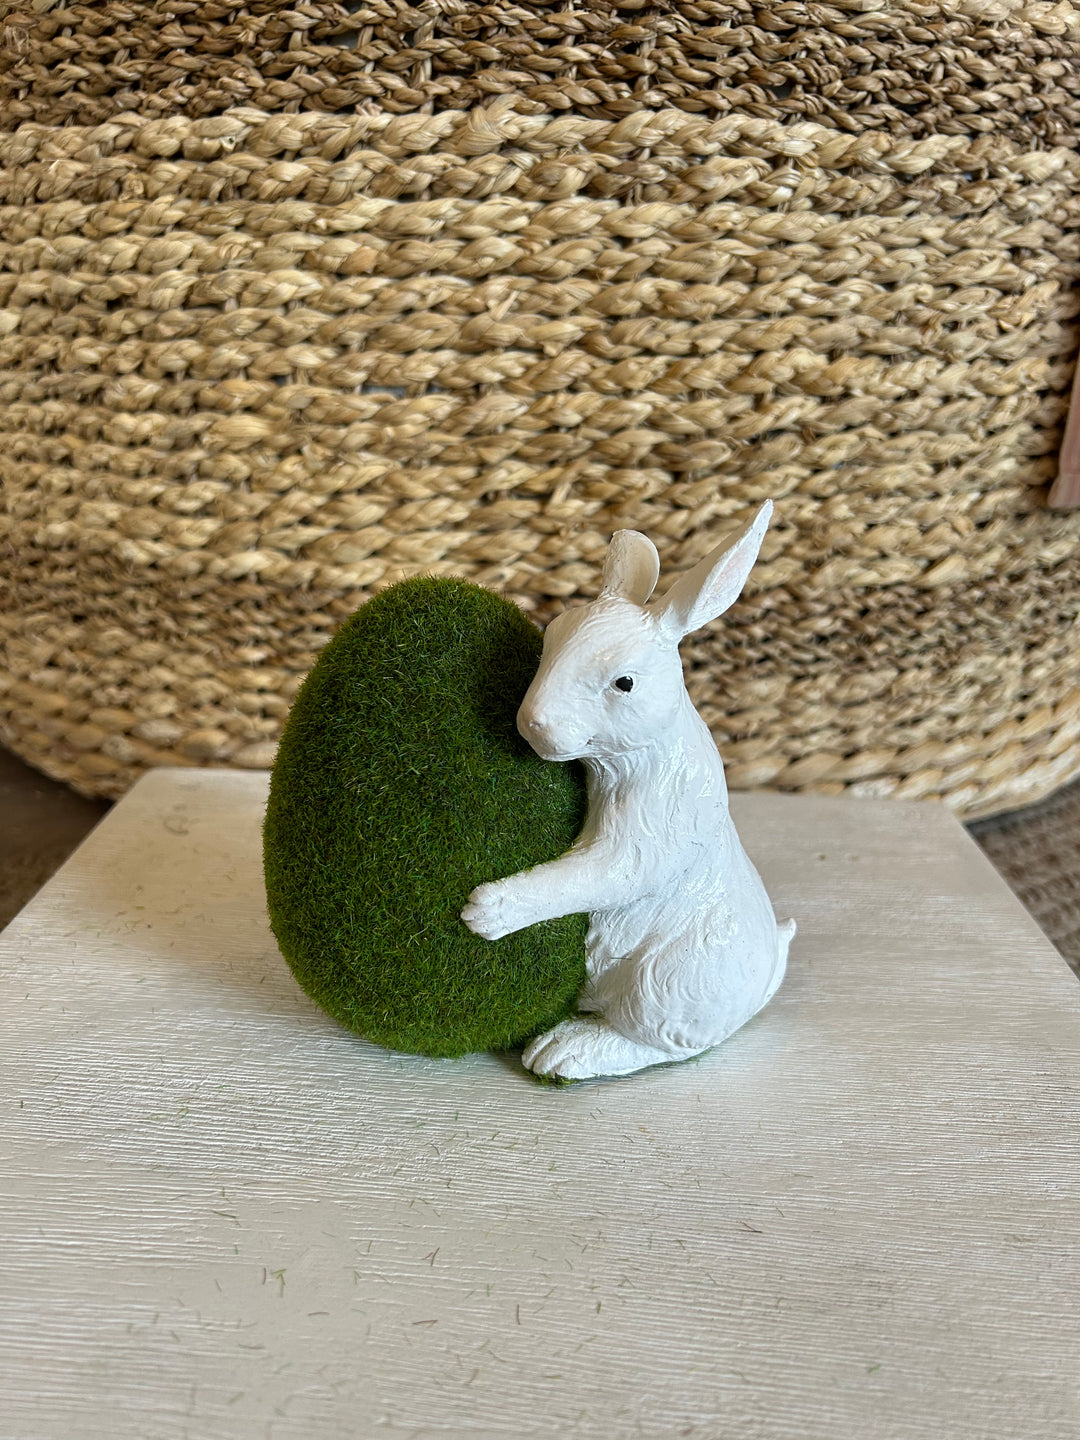 Moss Egg with White Rabbit